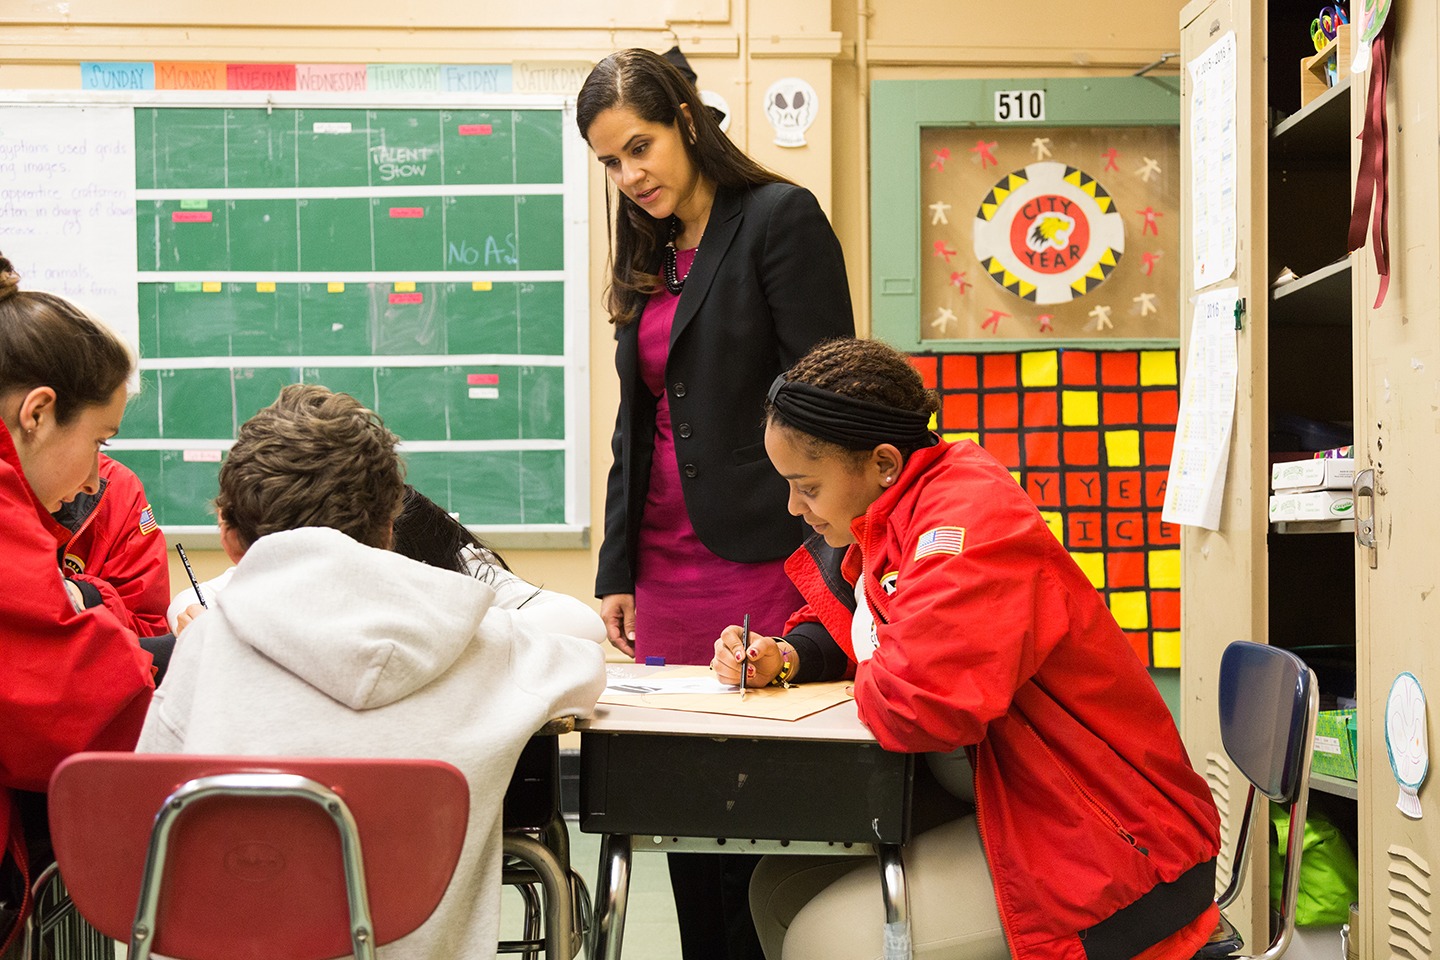 Corporate team donor observing AmeriCorps members working with students in a classroom at a table